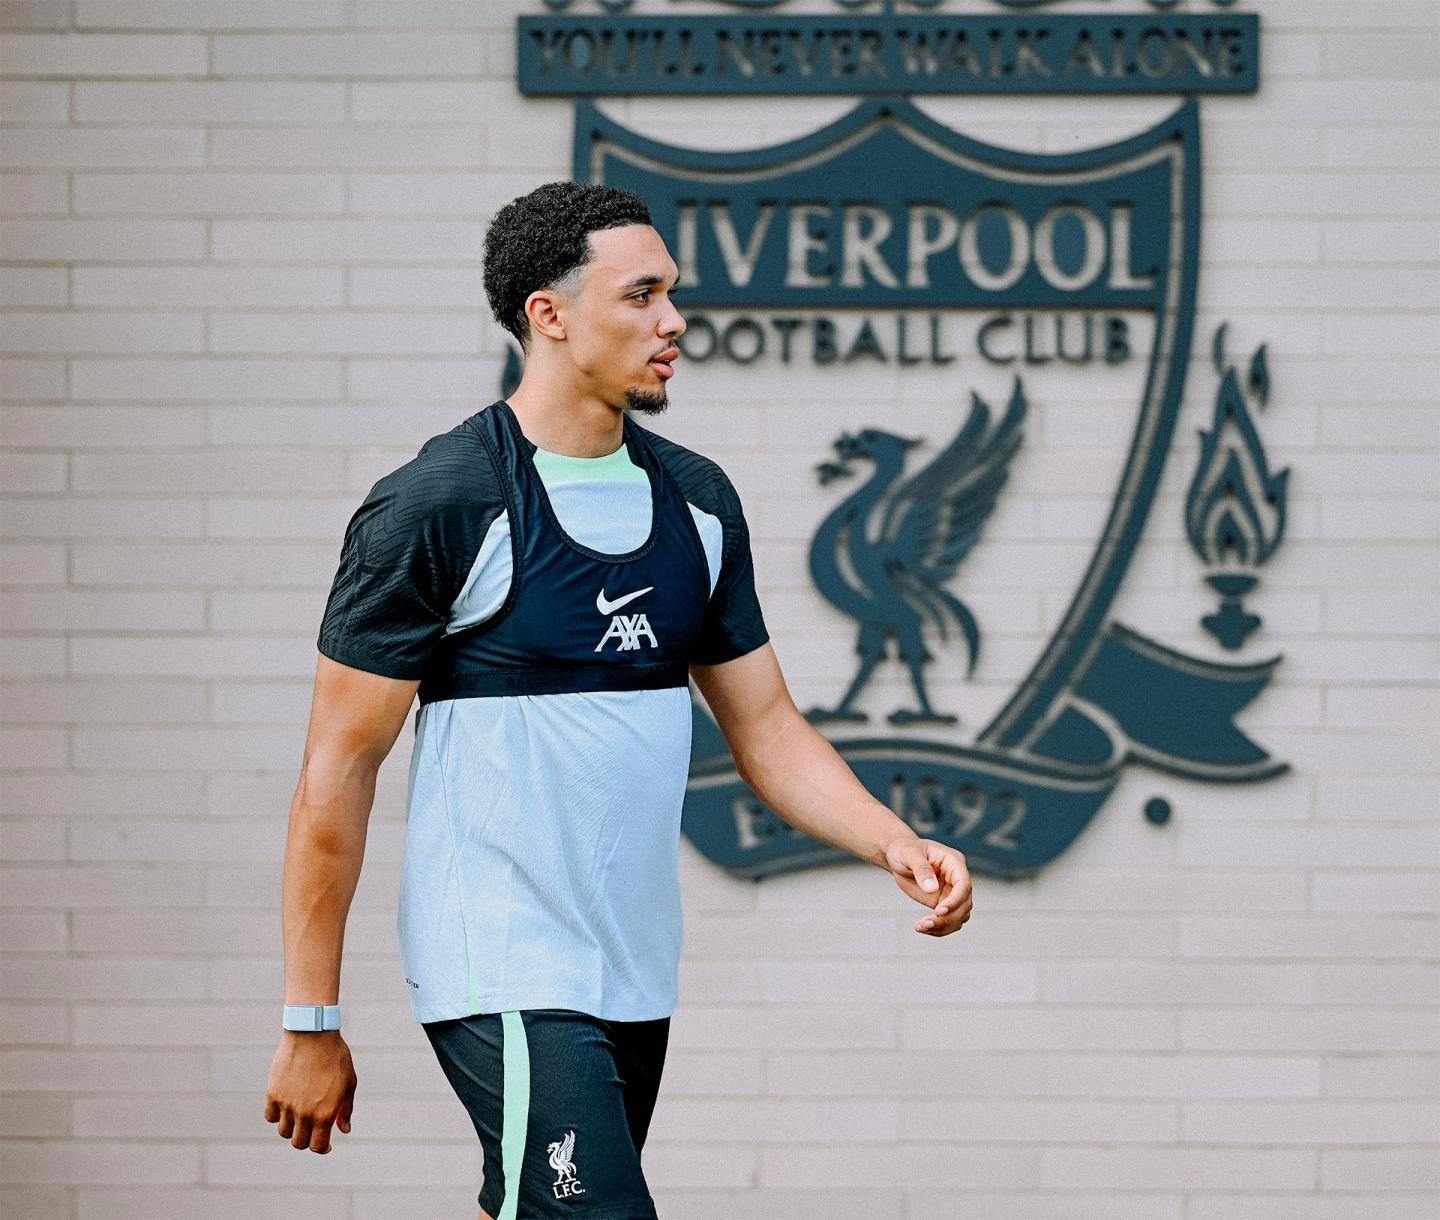 Trent Alexander-Arnold back in that 2019-20 haircut.